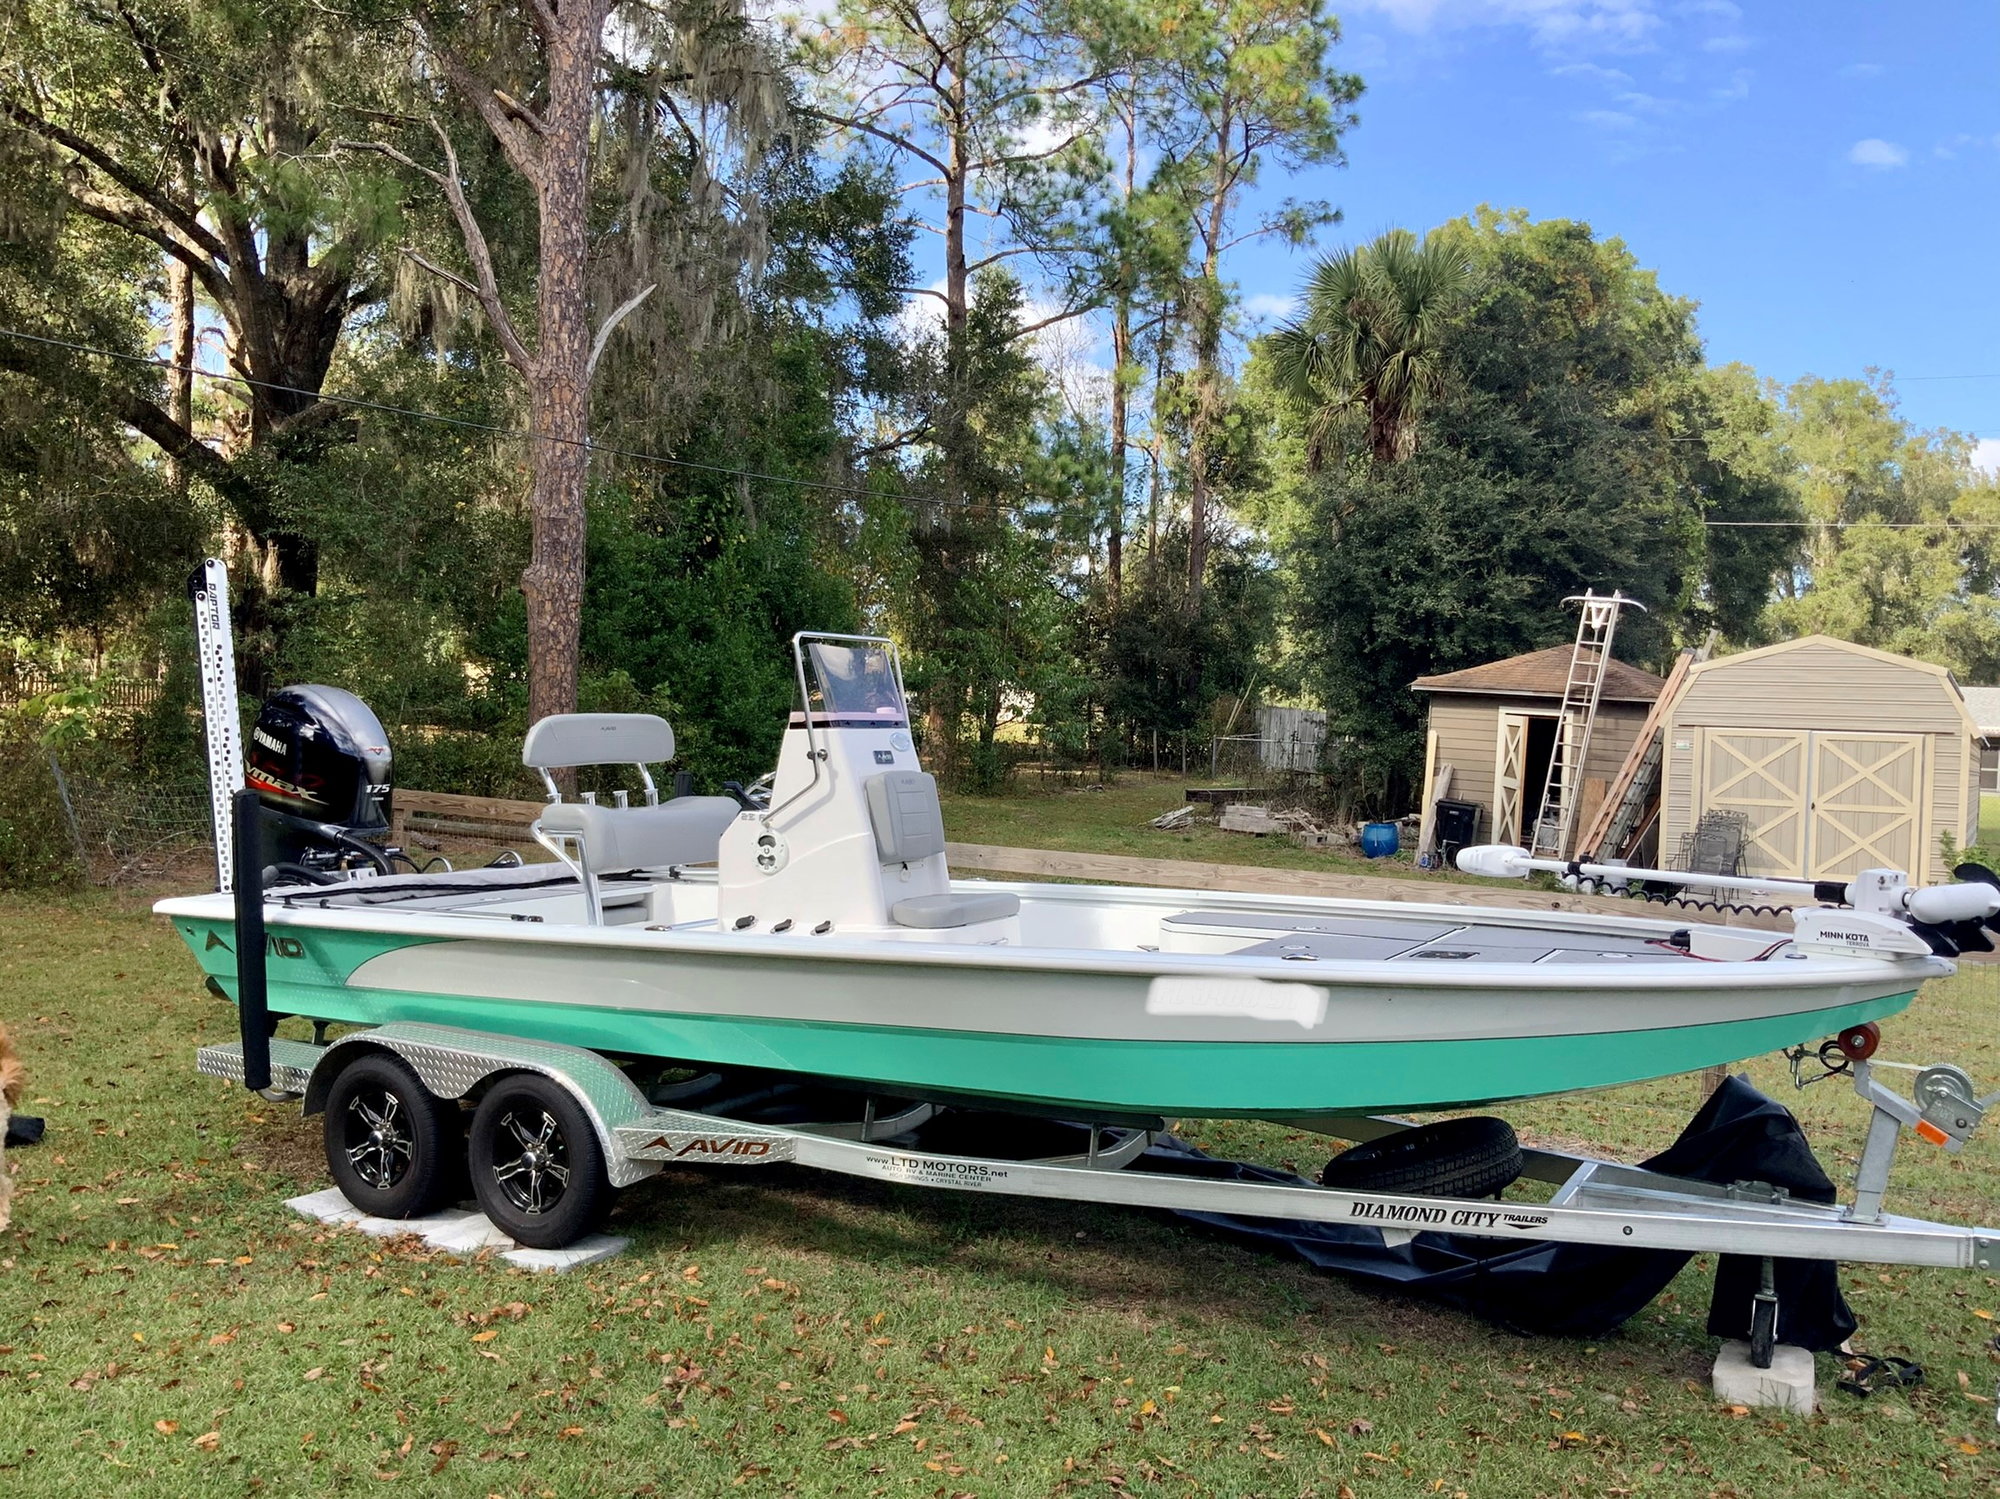 FS - 2021 Avid 23FS - The Hull Truth - Boating and Fishing Forum